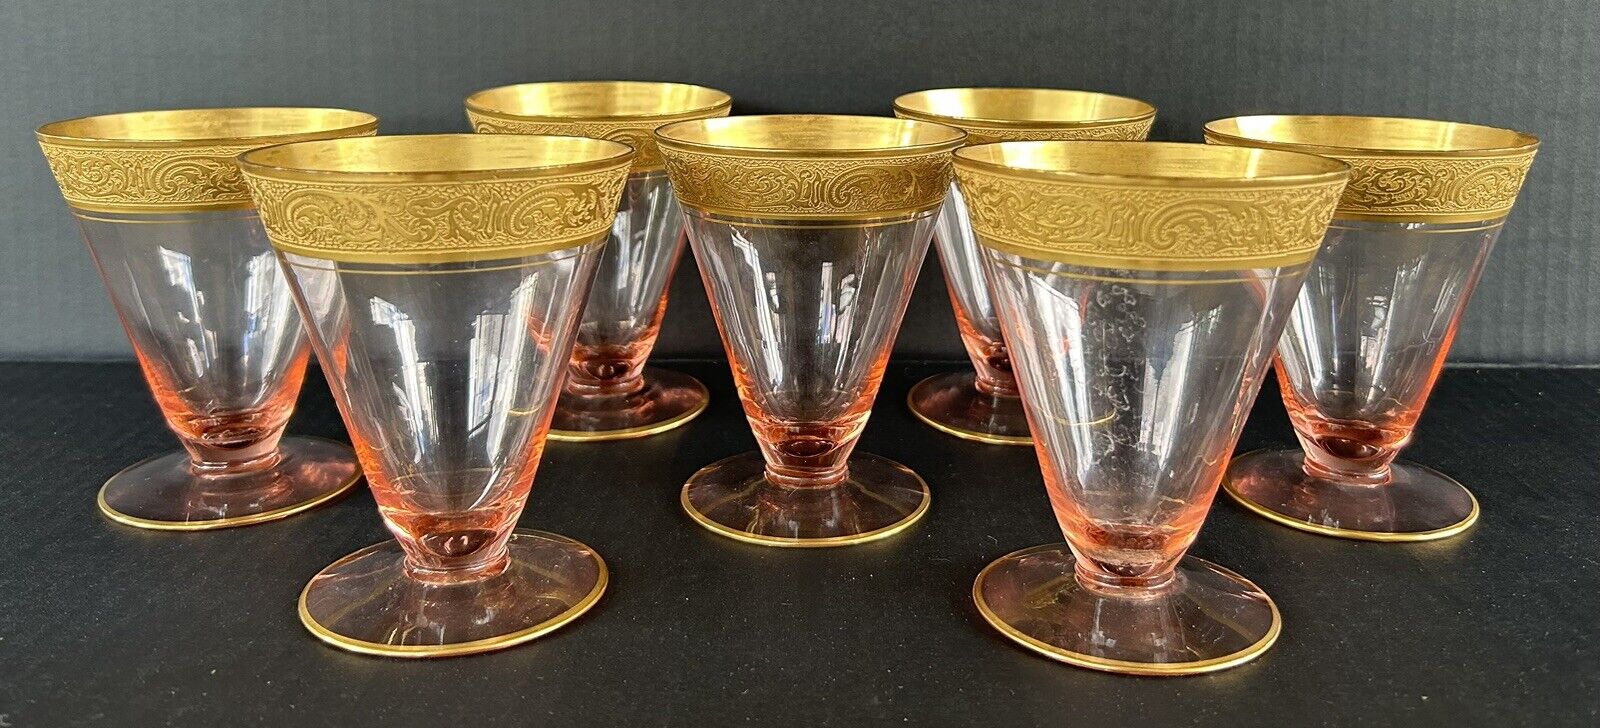 Cambridge Glass Florentine Pink Footed Tumblers 4 1/4